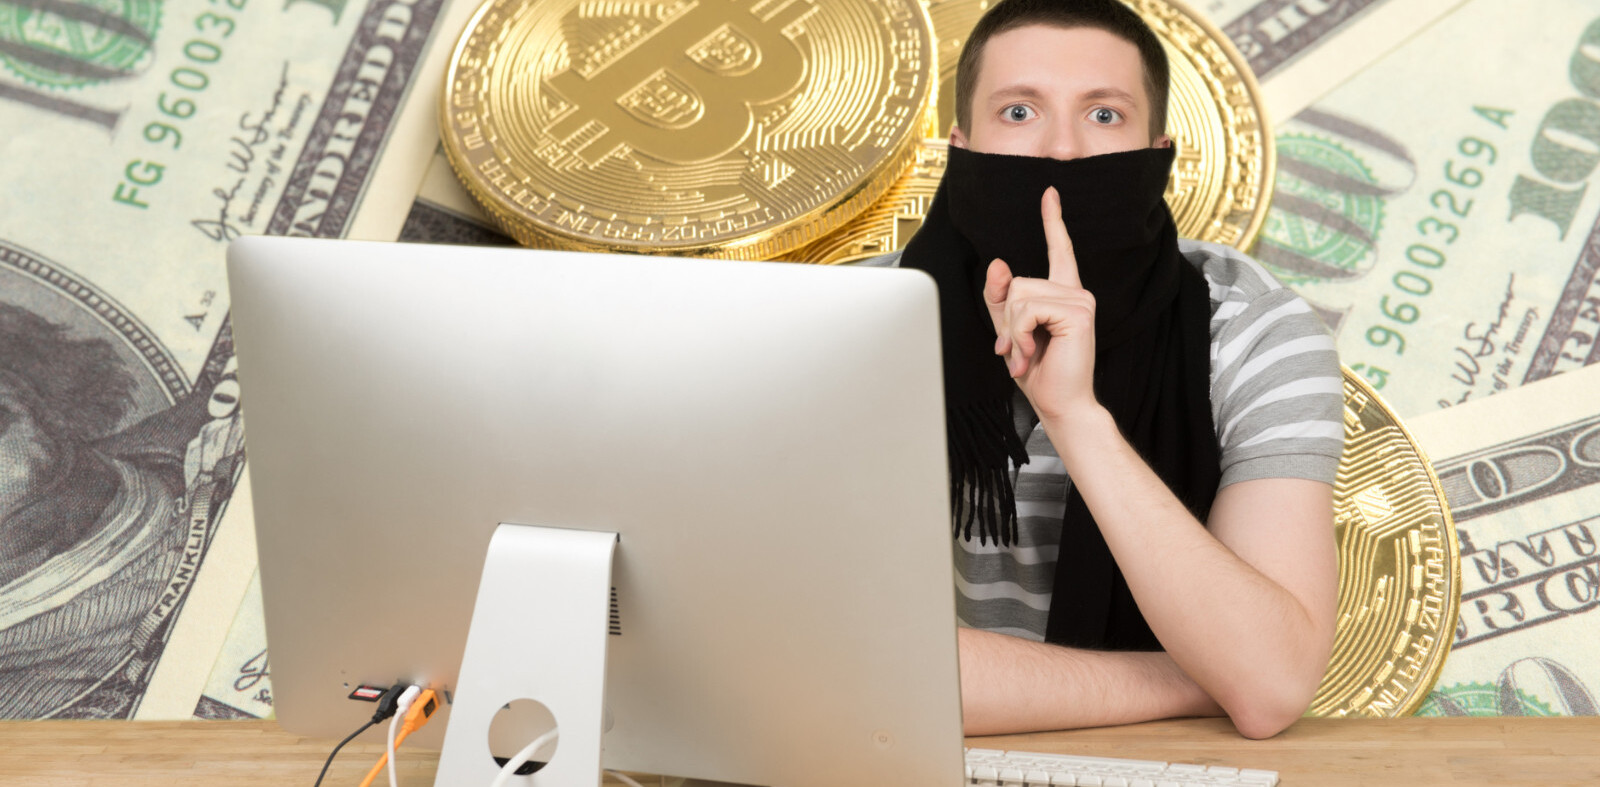 Dutch university pays $220K in Bitcoin to alleged Russian hackers